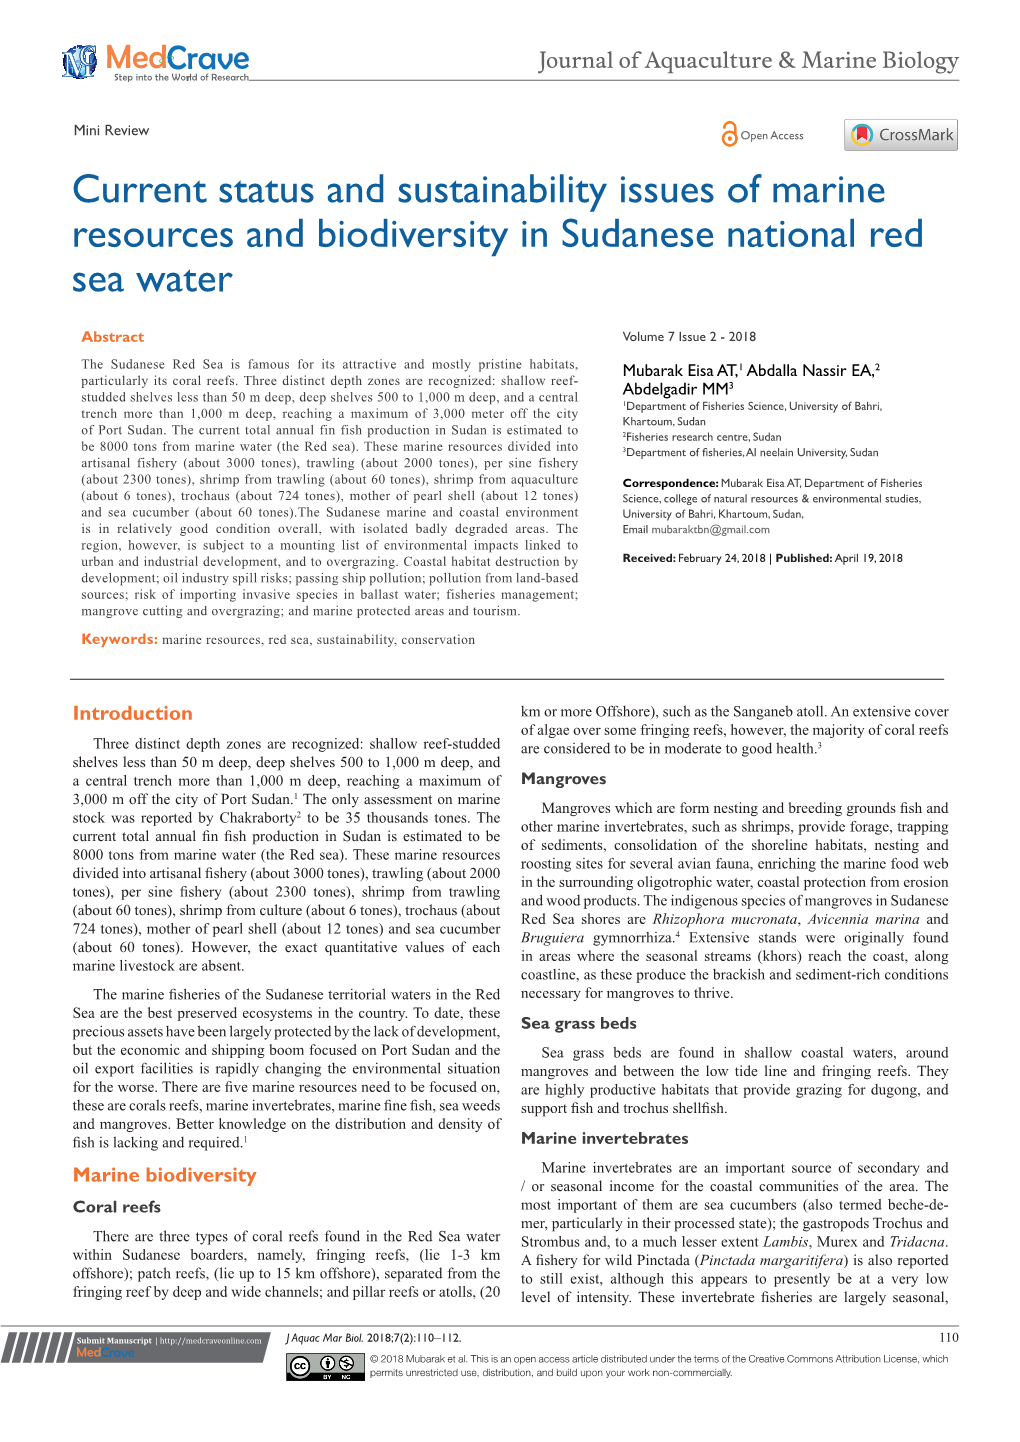 Current Status and Sustainability Issues of Marine Resources and Biodiversity in Sudanese National Red Sea Water